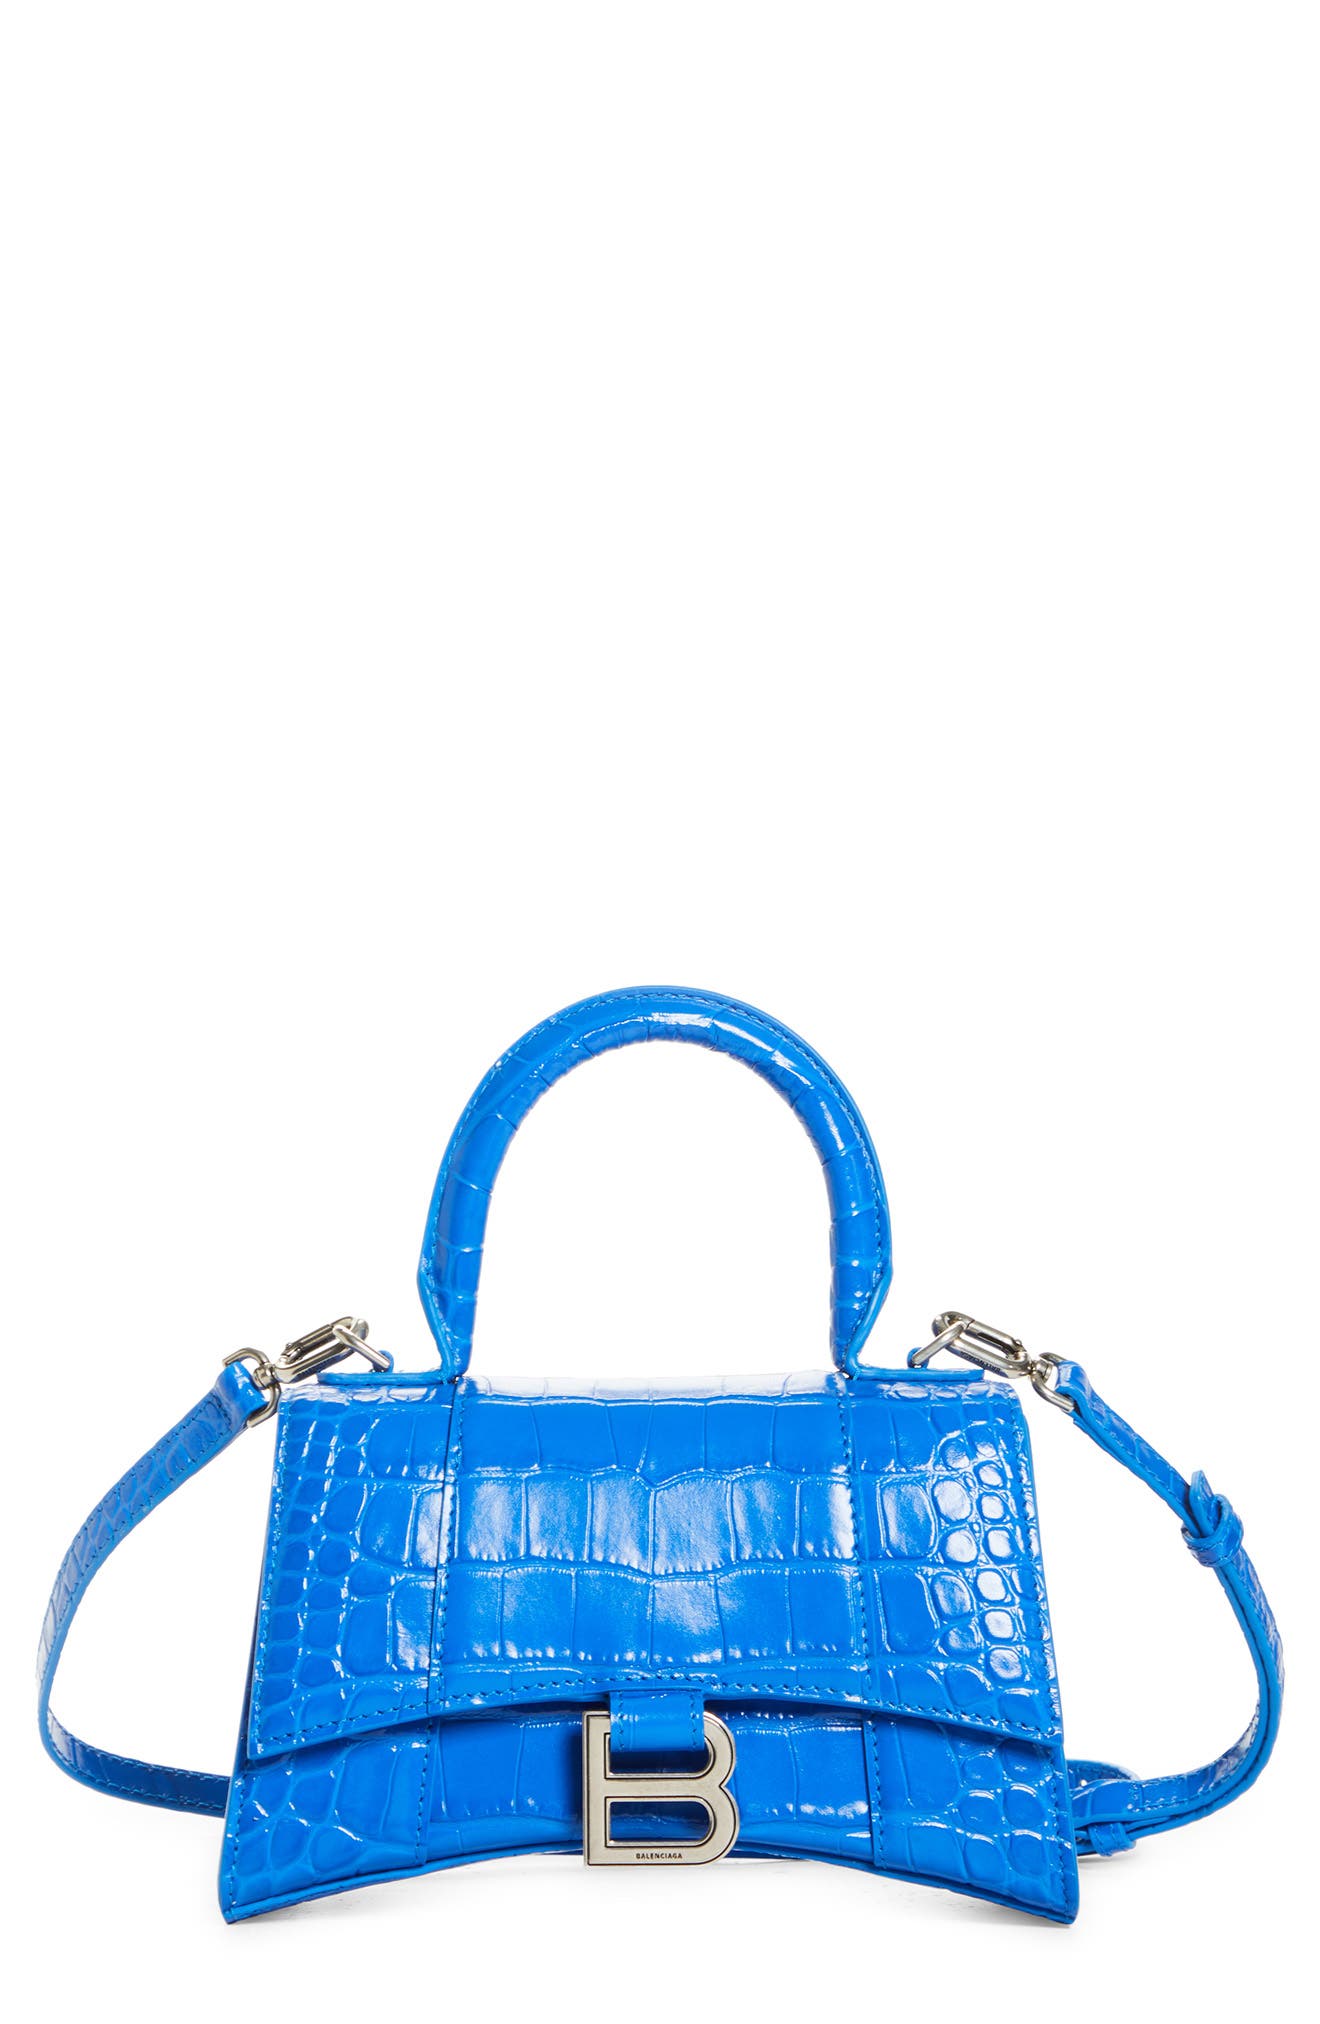 Balenciaga Extra Small Hourglass Croc Embossed Leather Top Handle Bag in Royal Blue at Nordstrom